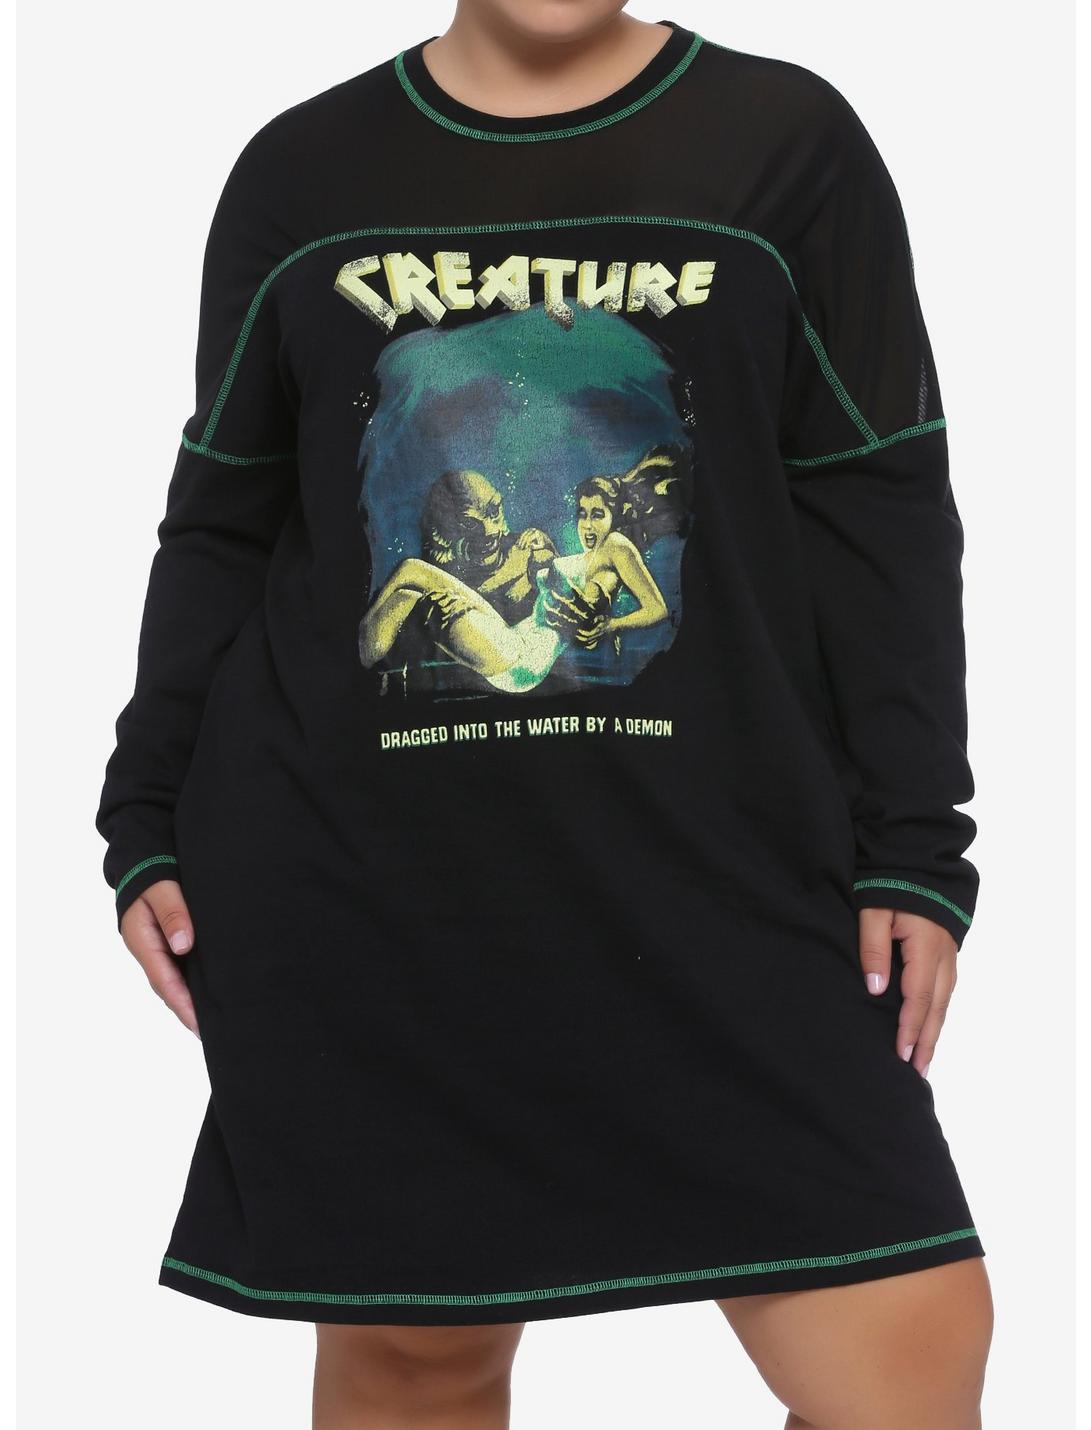 Universal Monsters Creature From The Black Lagoon Long-Sleeve T-Shirt Dress Plus Size, MULTI, hi-res